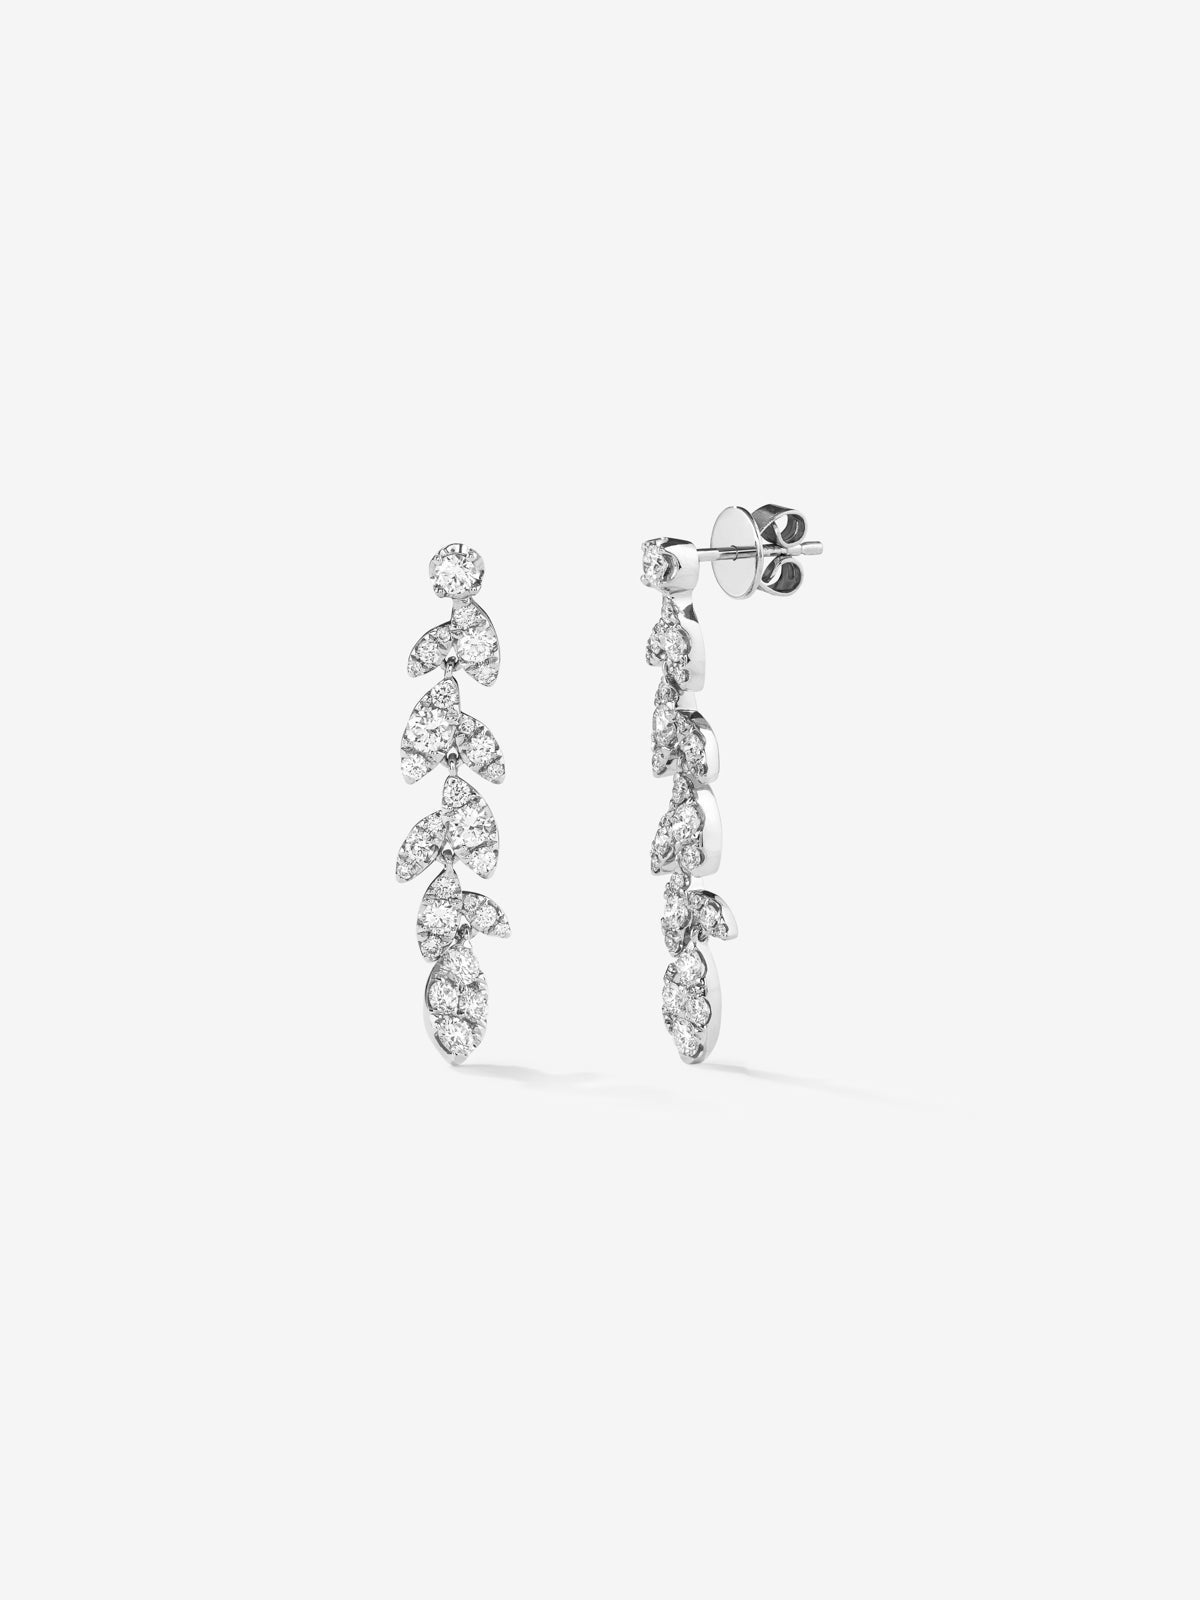 18K white gold earrings with 58 brilliant-cut diamonds with a total of 1.48 cts